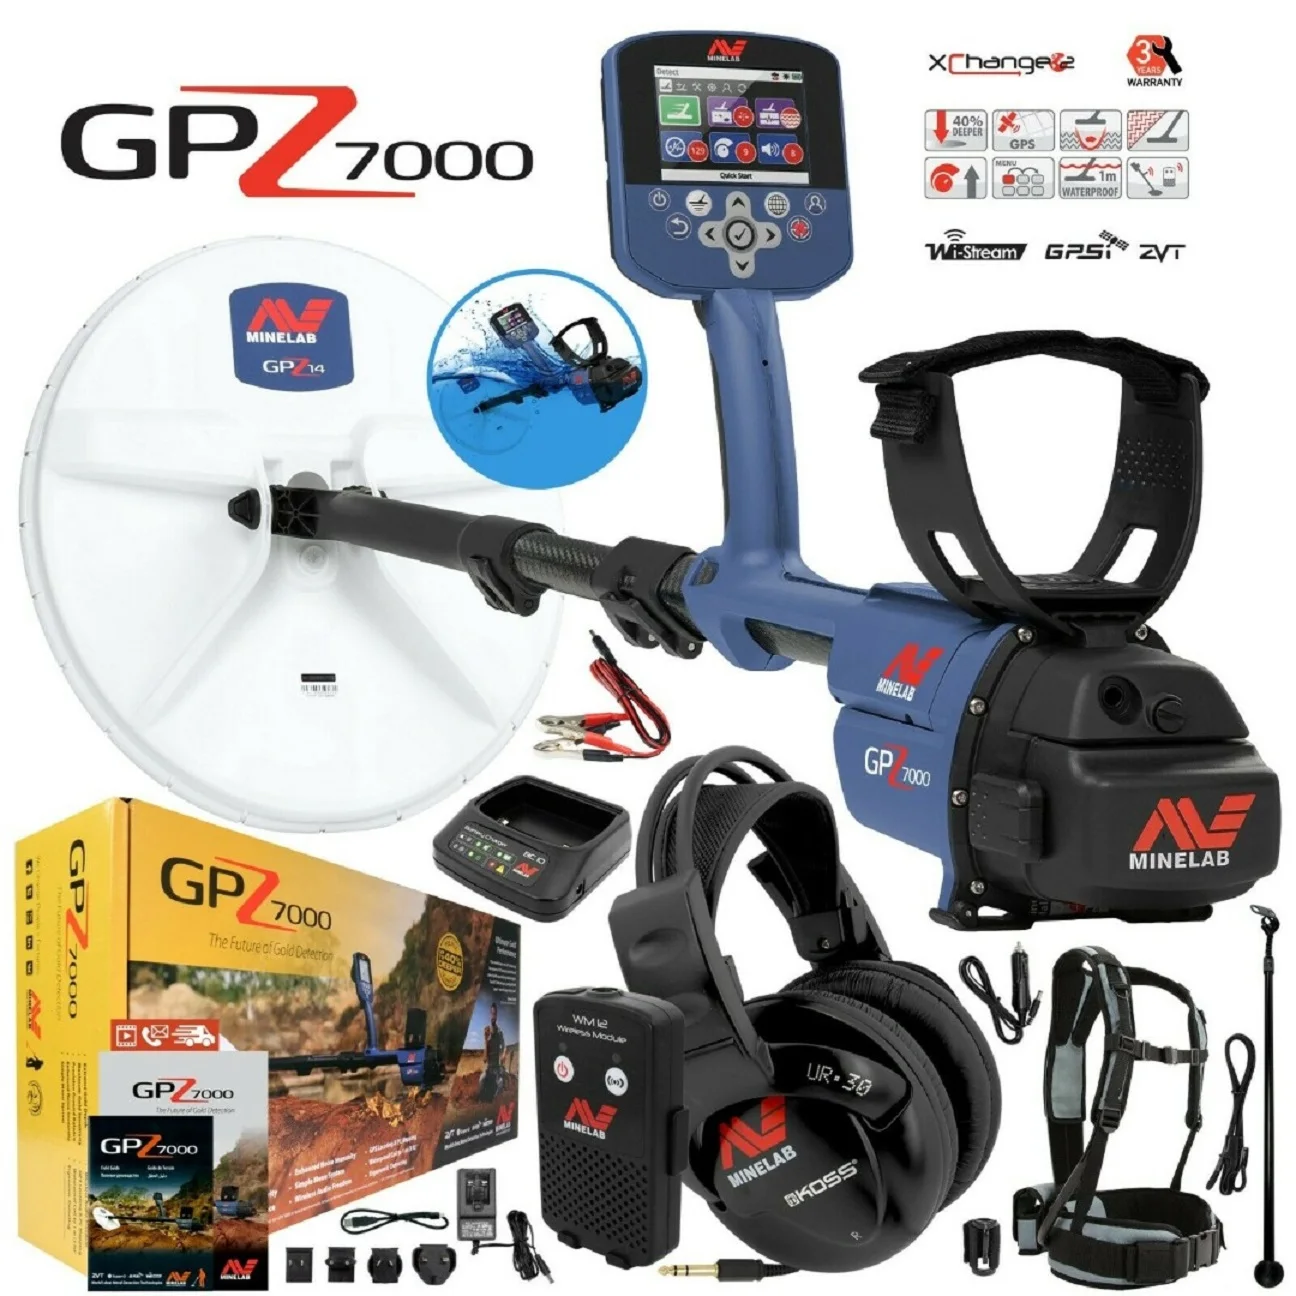 

Hot Discount sales on Minelabs GPZ 7000 Gold Nugget Metal Detector